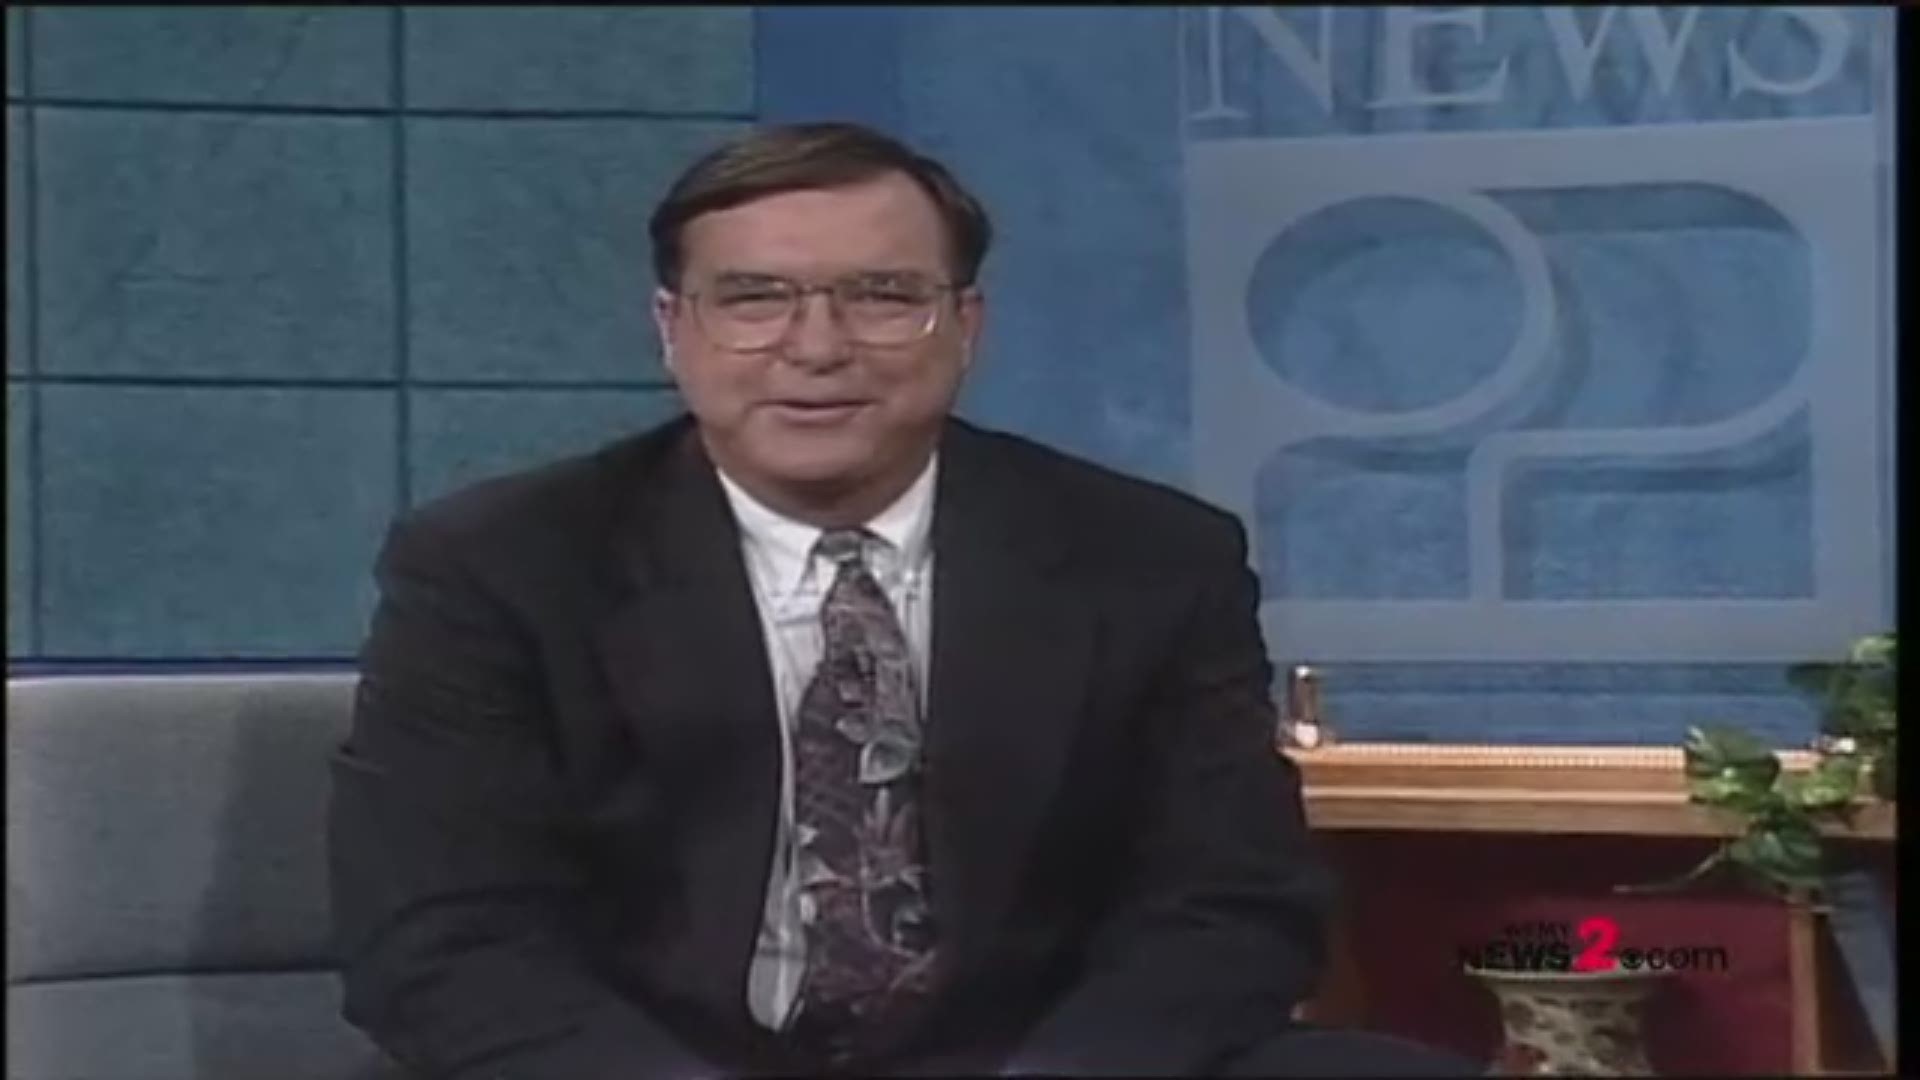 Mike Hogewood worked with WFMY News 2 for 15 years as a Sports Director